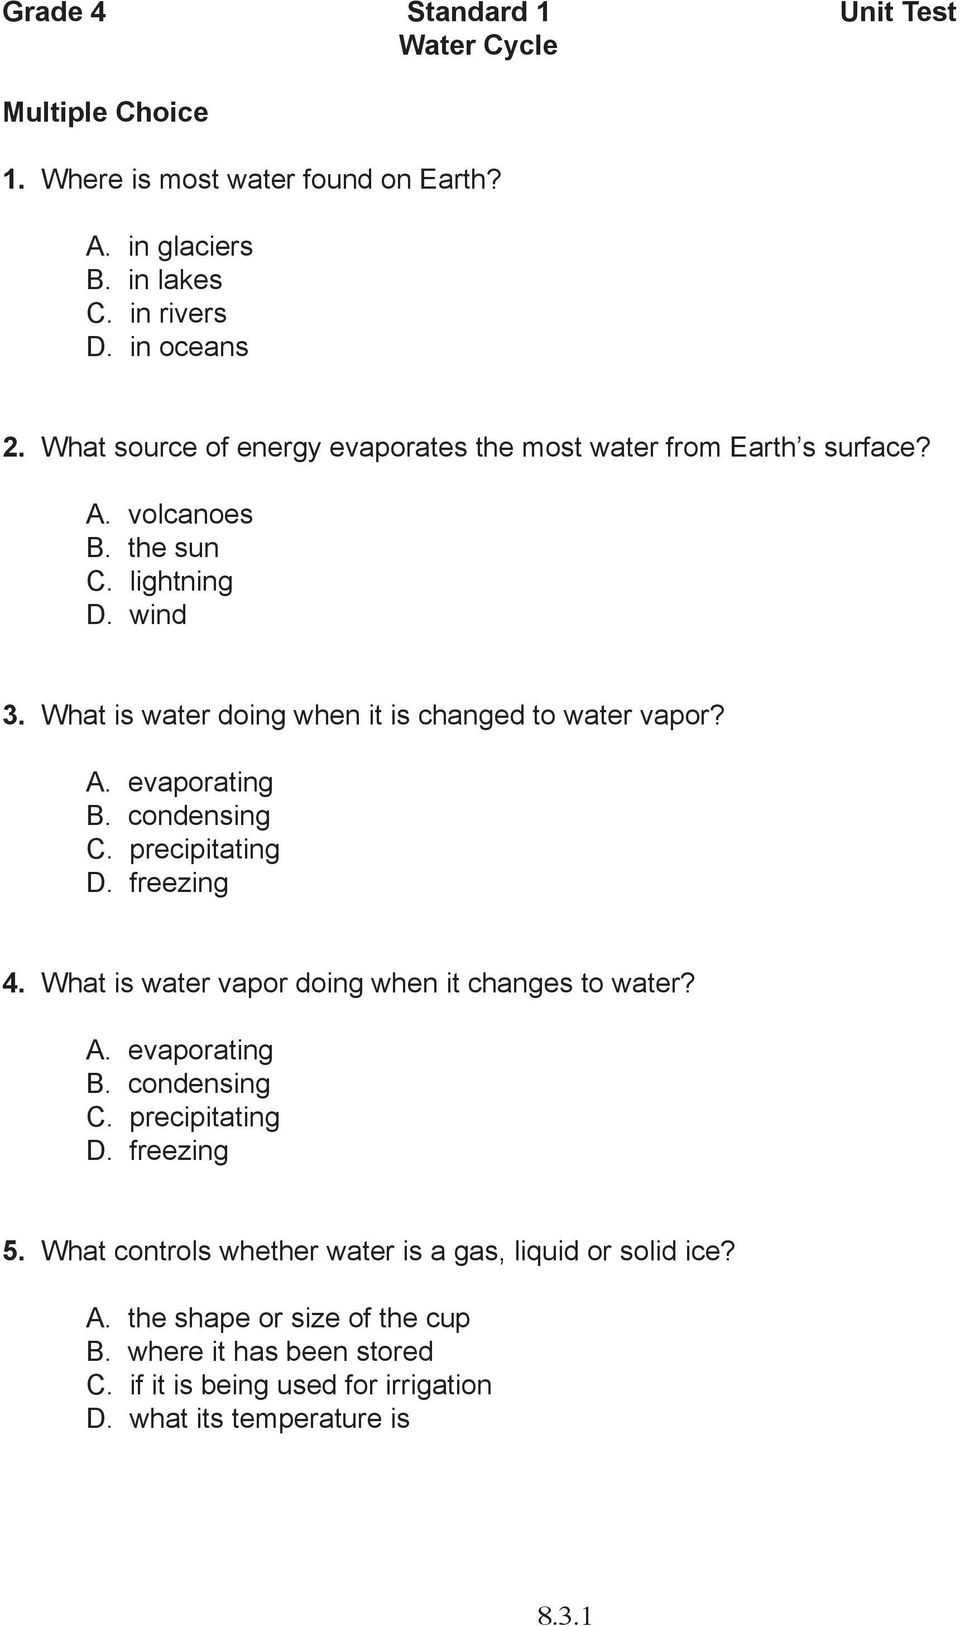 Water Cycle Worksheet Answer Key Grade 4 Standard 1 Unit Test Water Cycle Multiple Choice 1